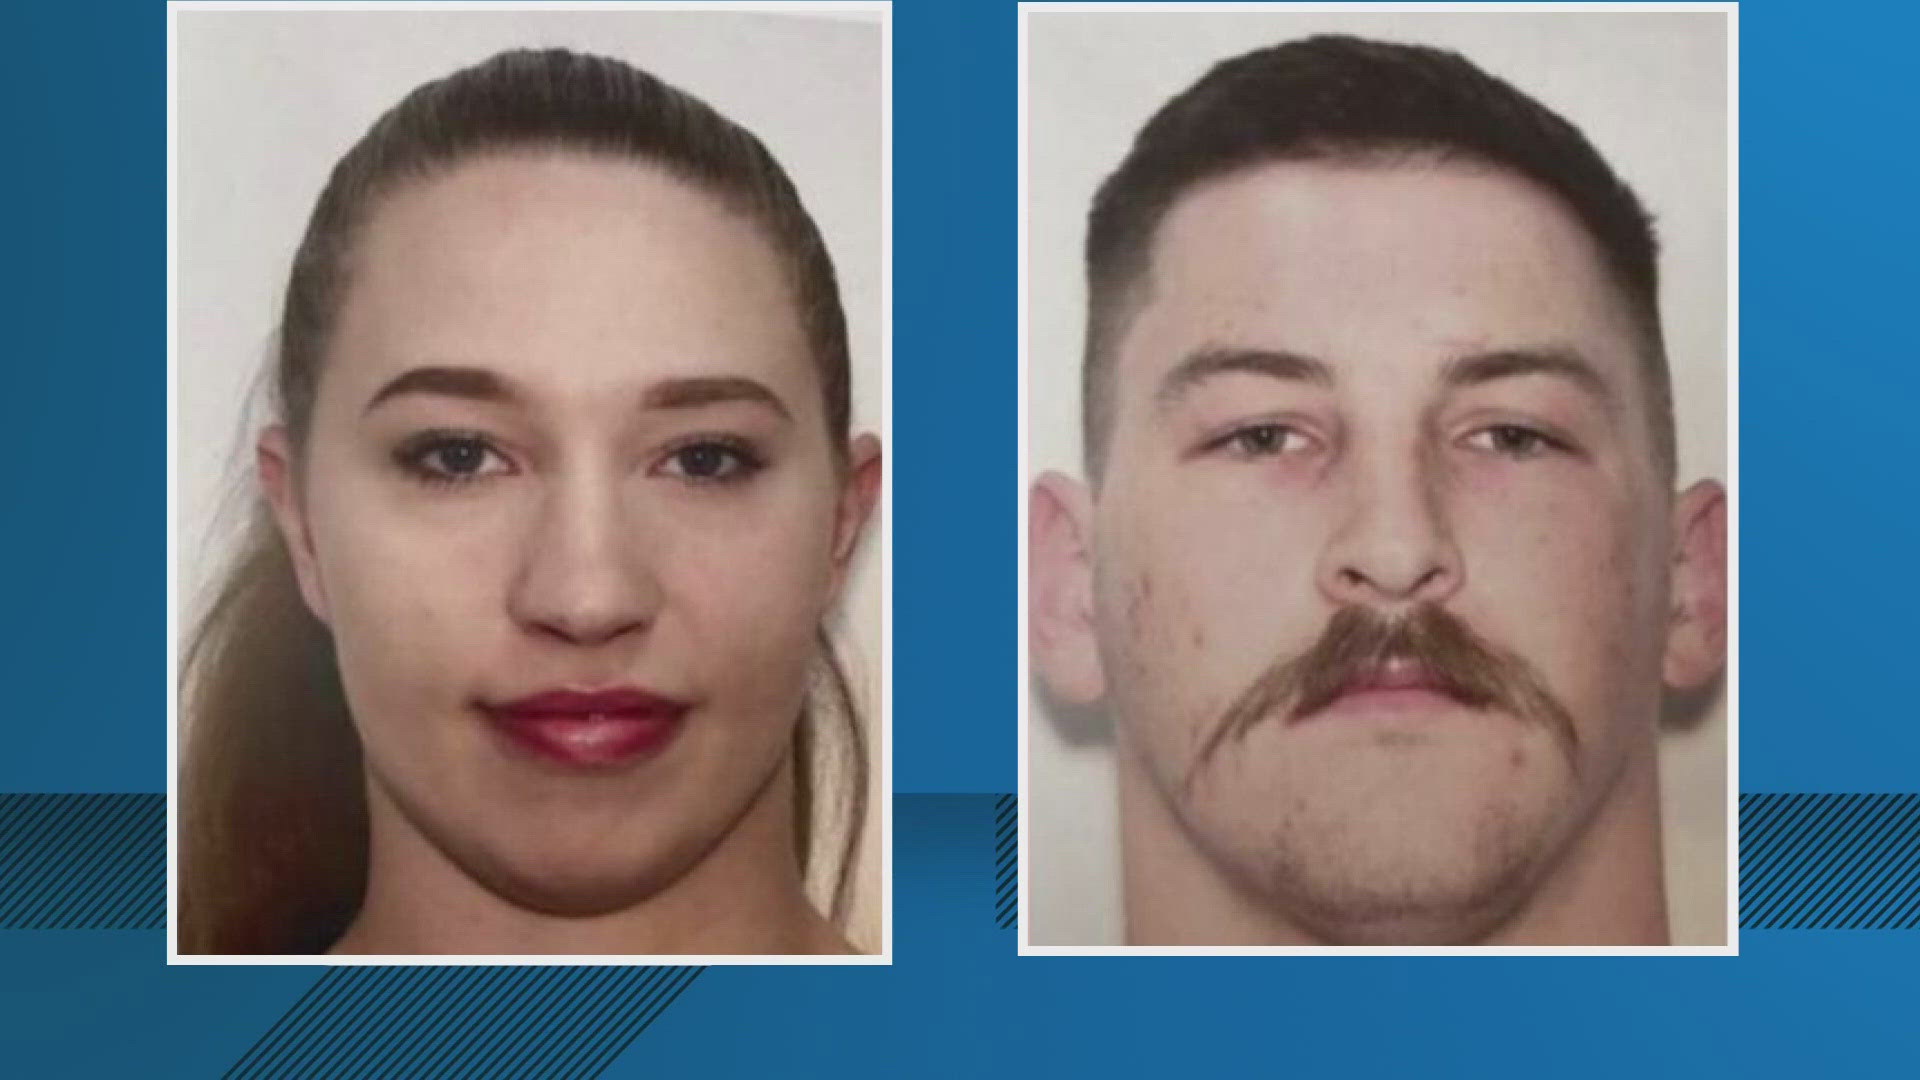 The bodies of Raegan Anderson and Chandler Kuhbander were discovered in Cocke County, Tennessee, according to police.